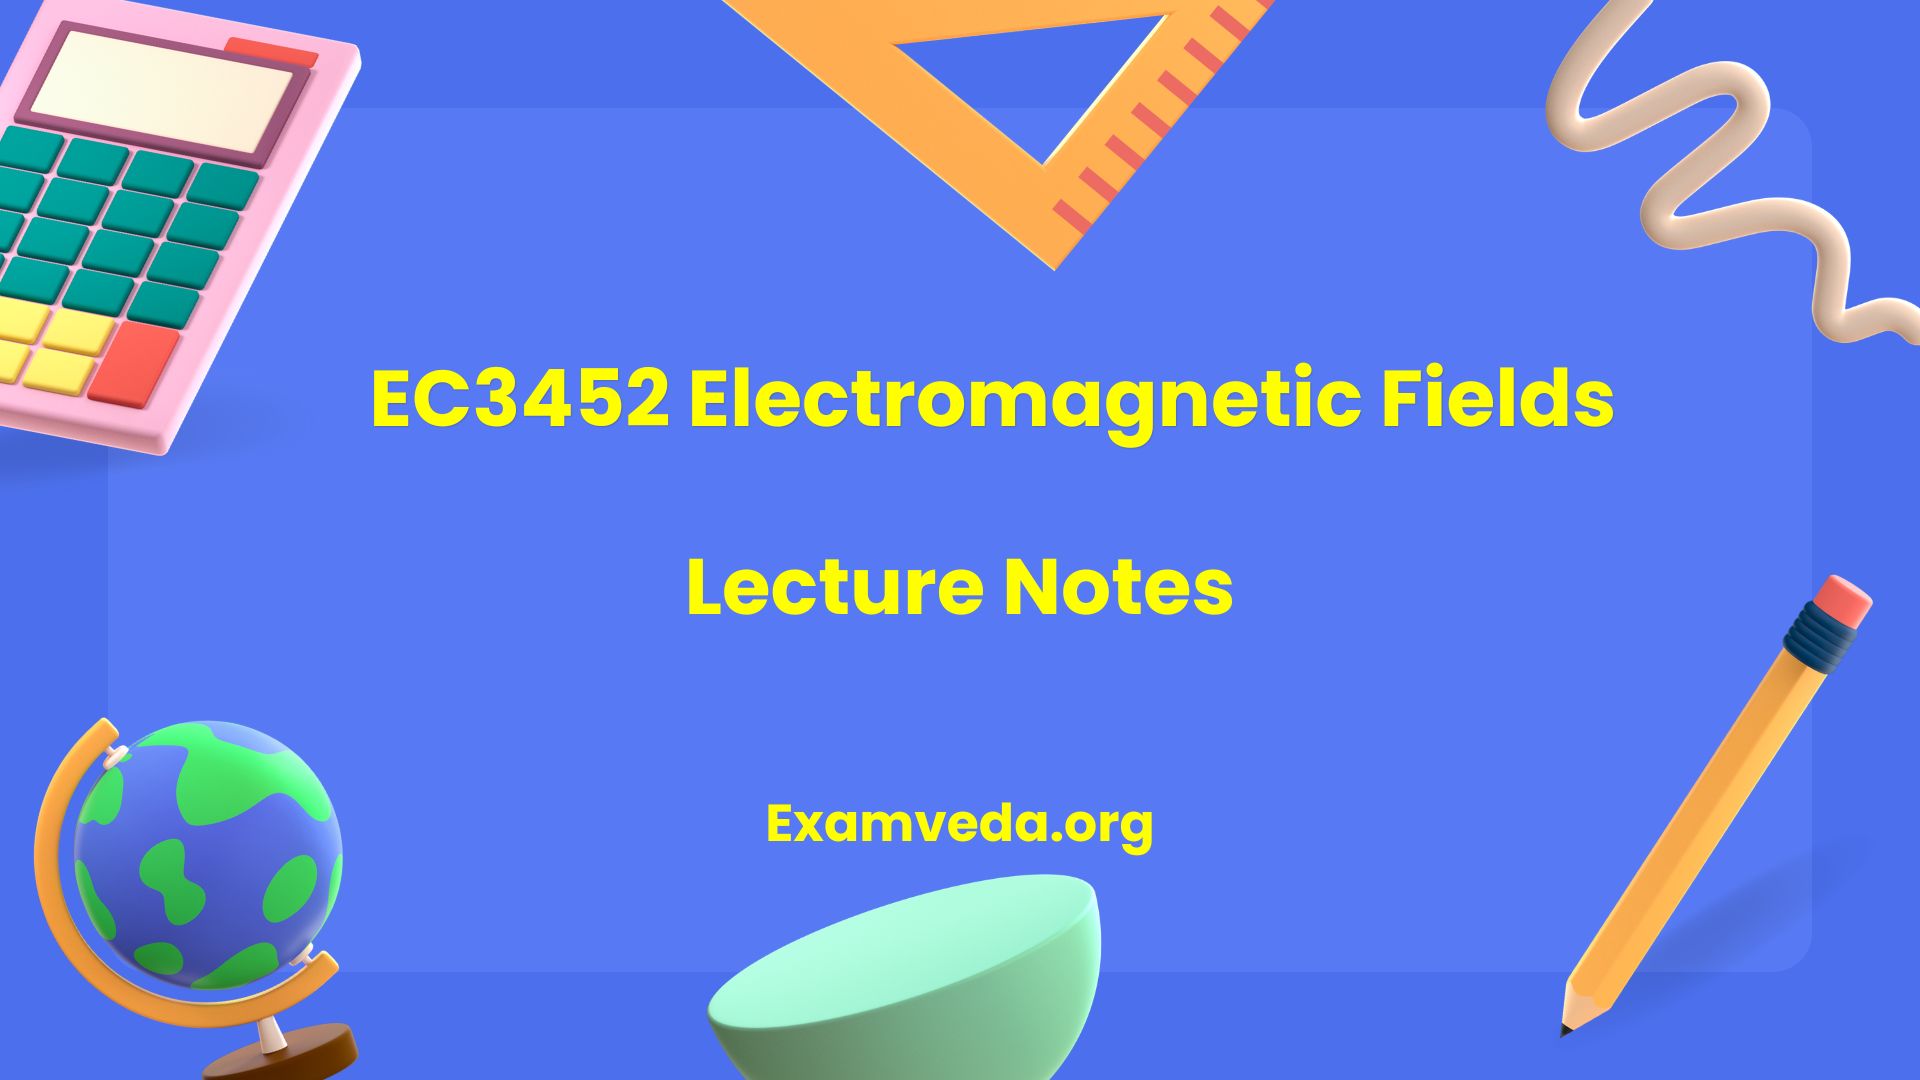 EC3452 Electromagnetic Fields Lecture Notes